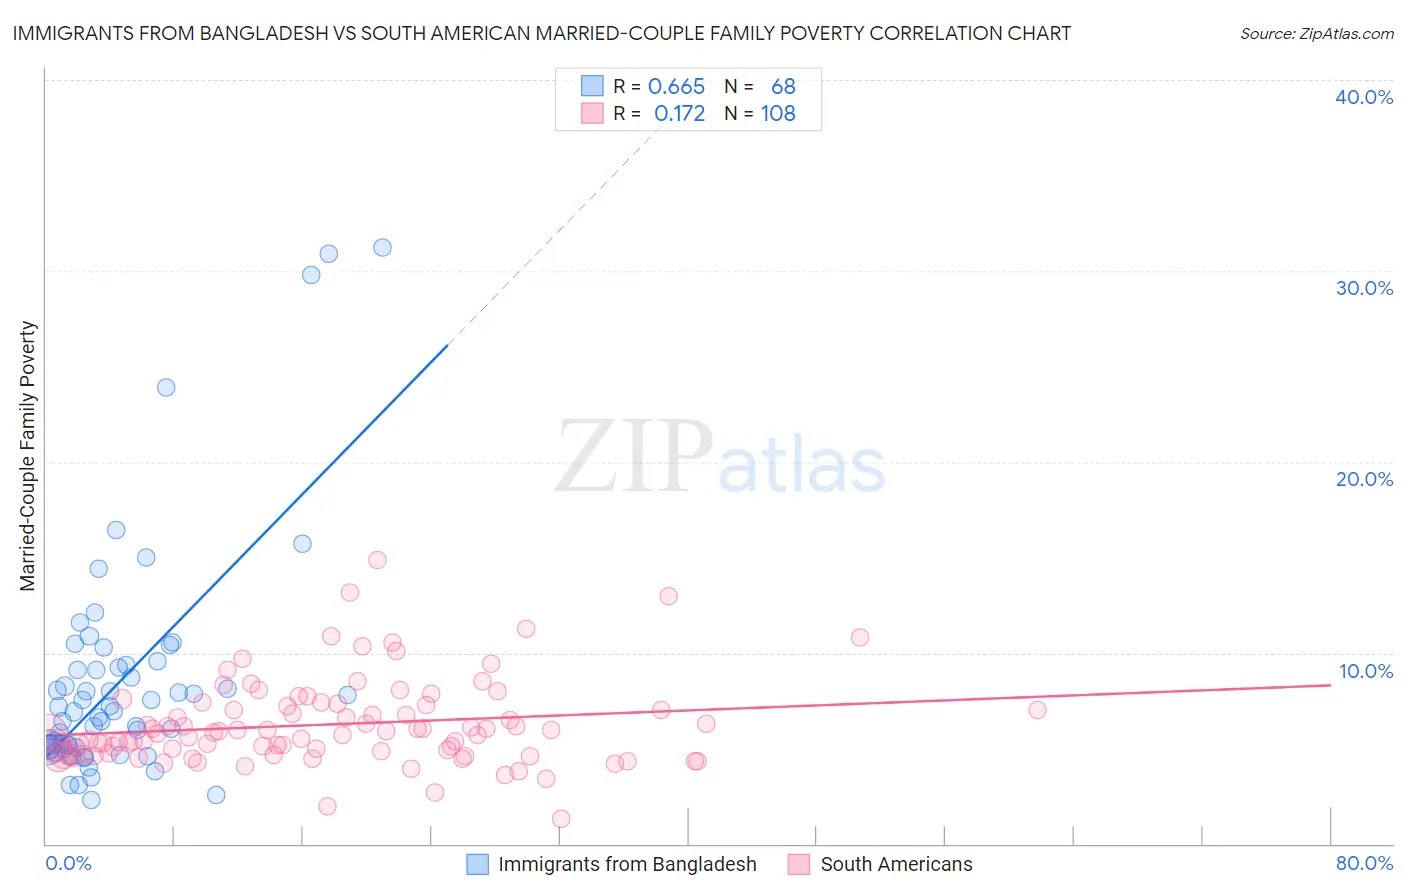 Immigrants from Bangladesh vs South American Married-Couple Family Poverty